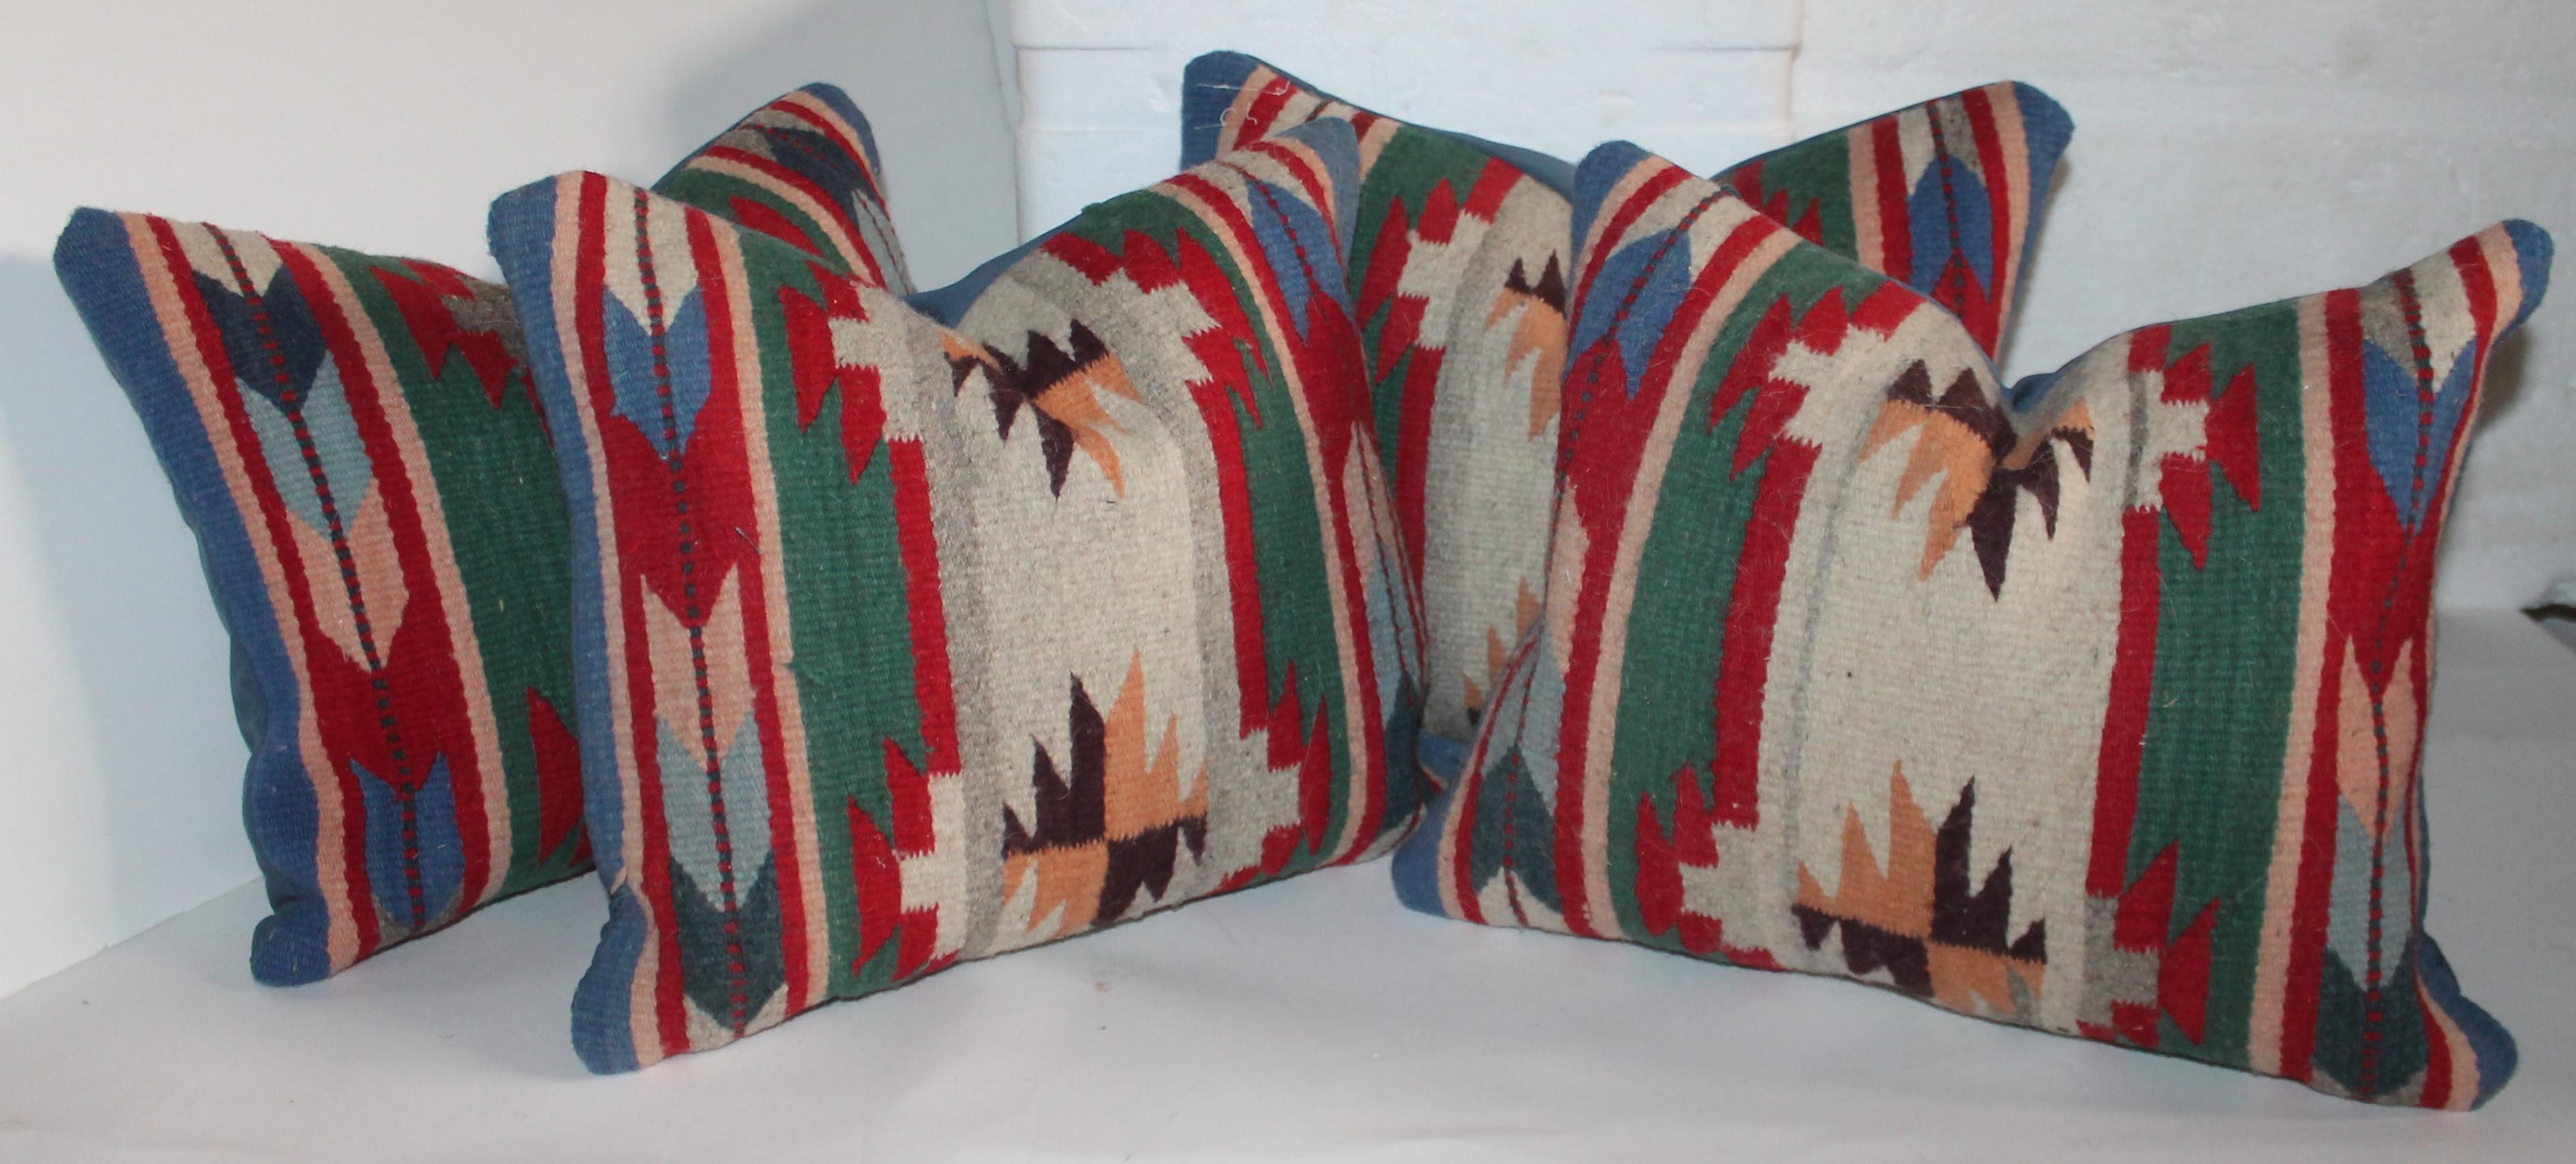 Collection of Mexican Indian weaving pillows that have a Navajo look to them. Selling as a group of four pillows.